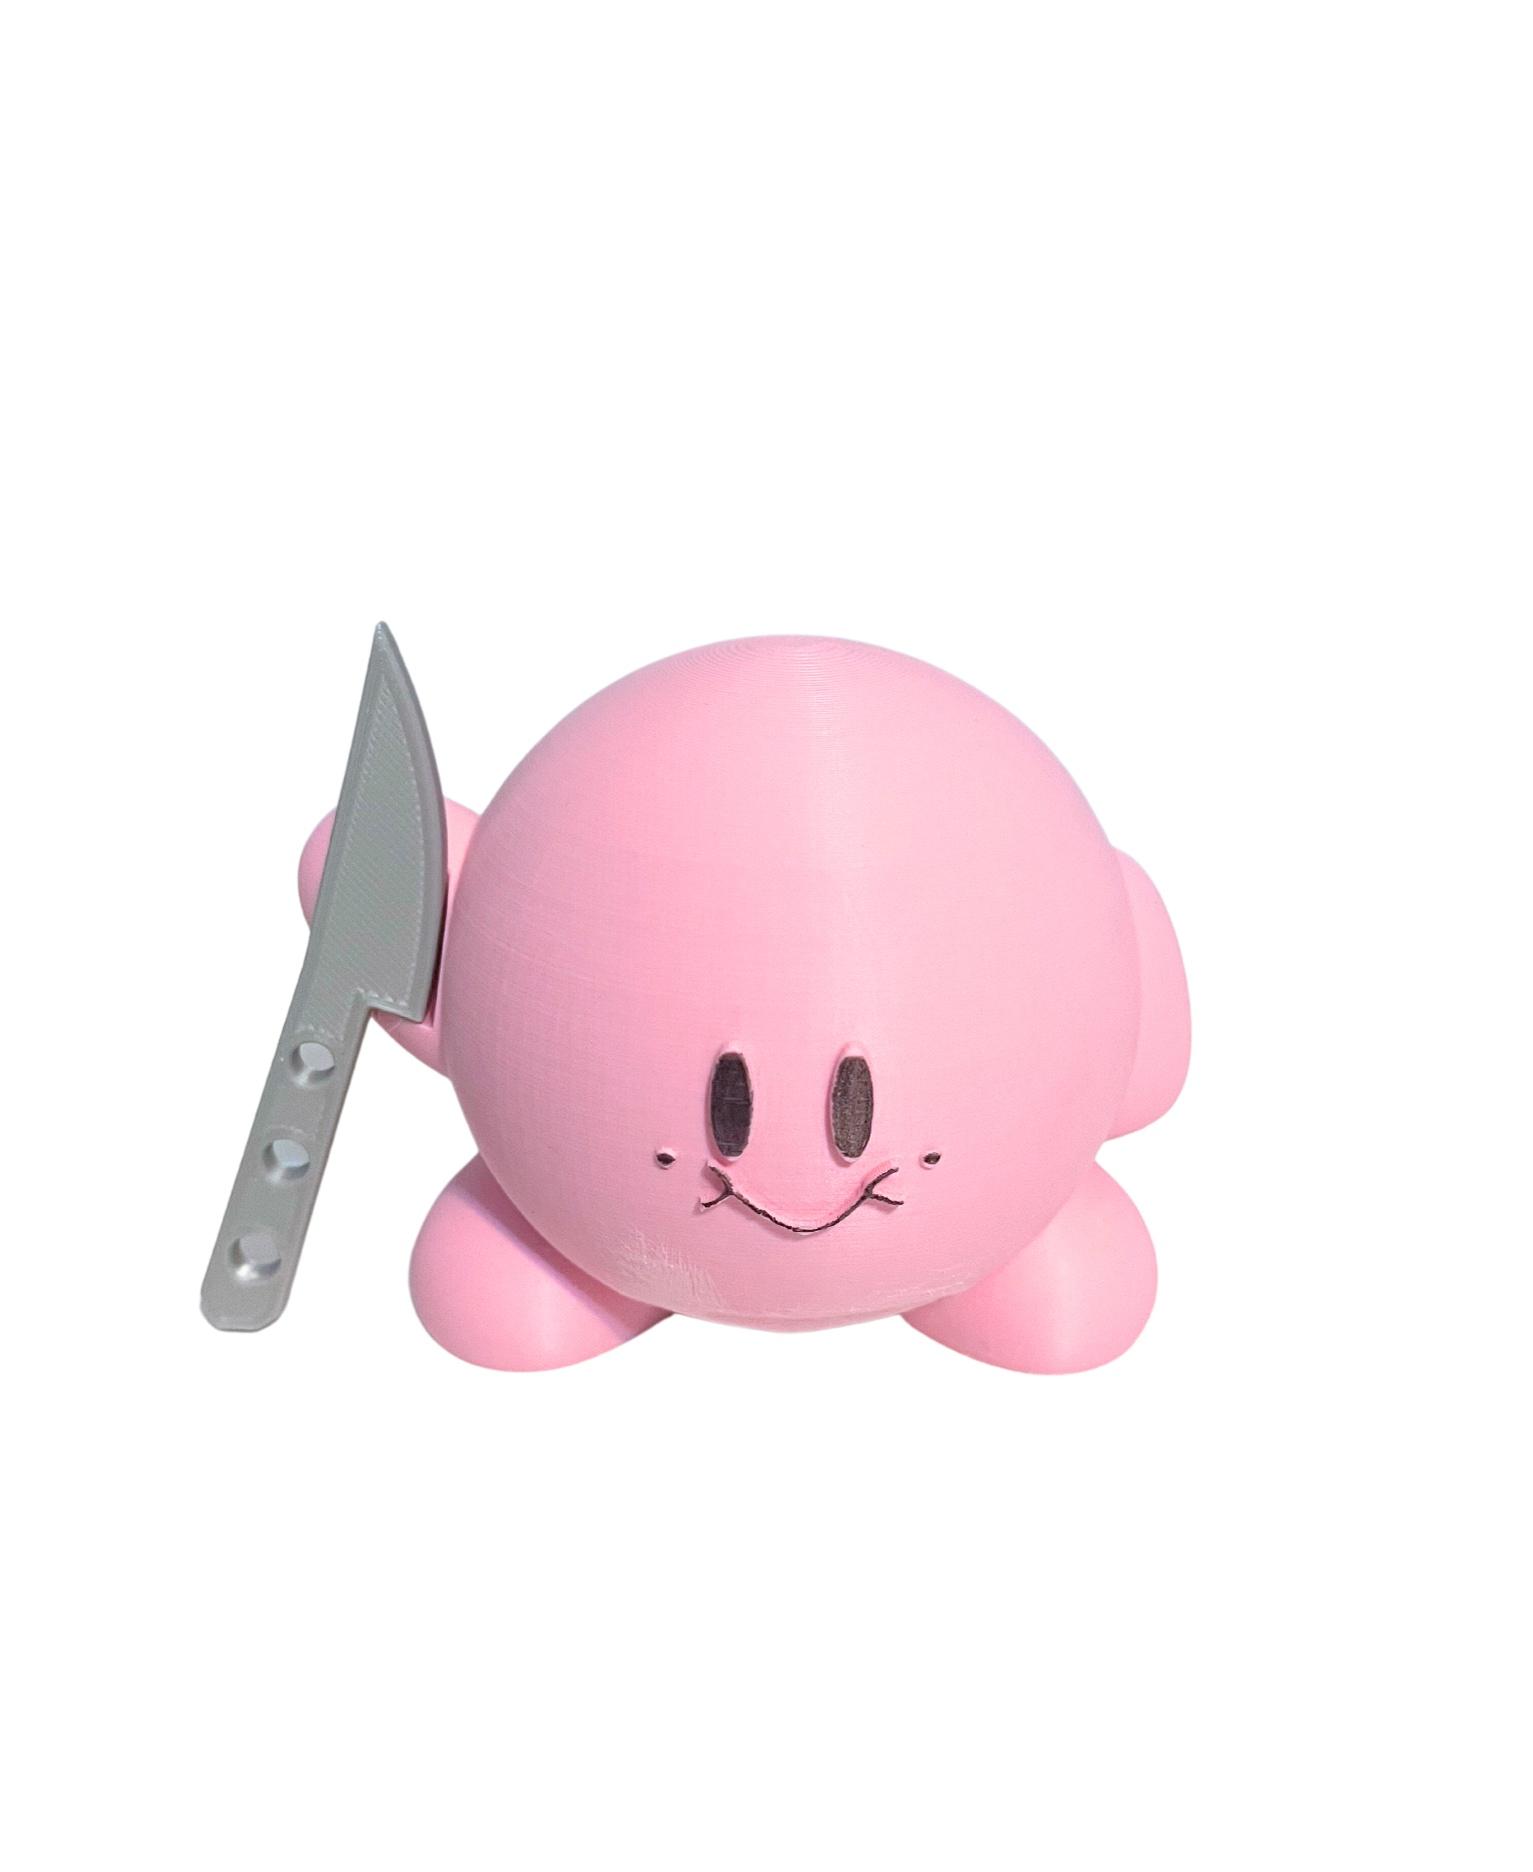 kirby with a knife - Hi - 3d model